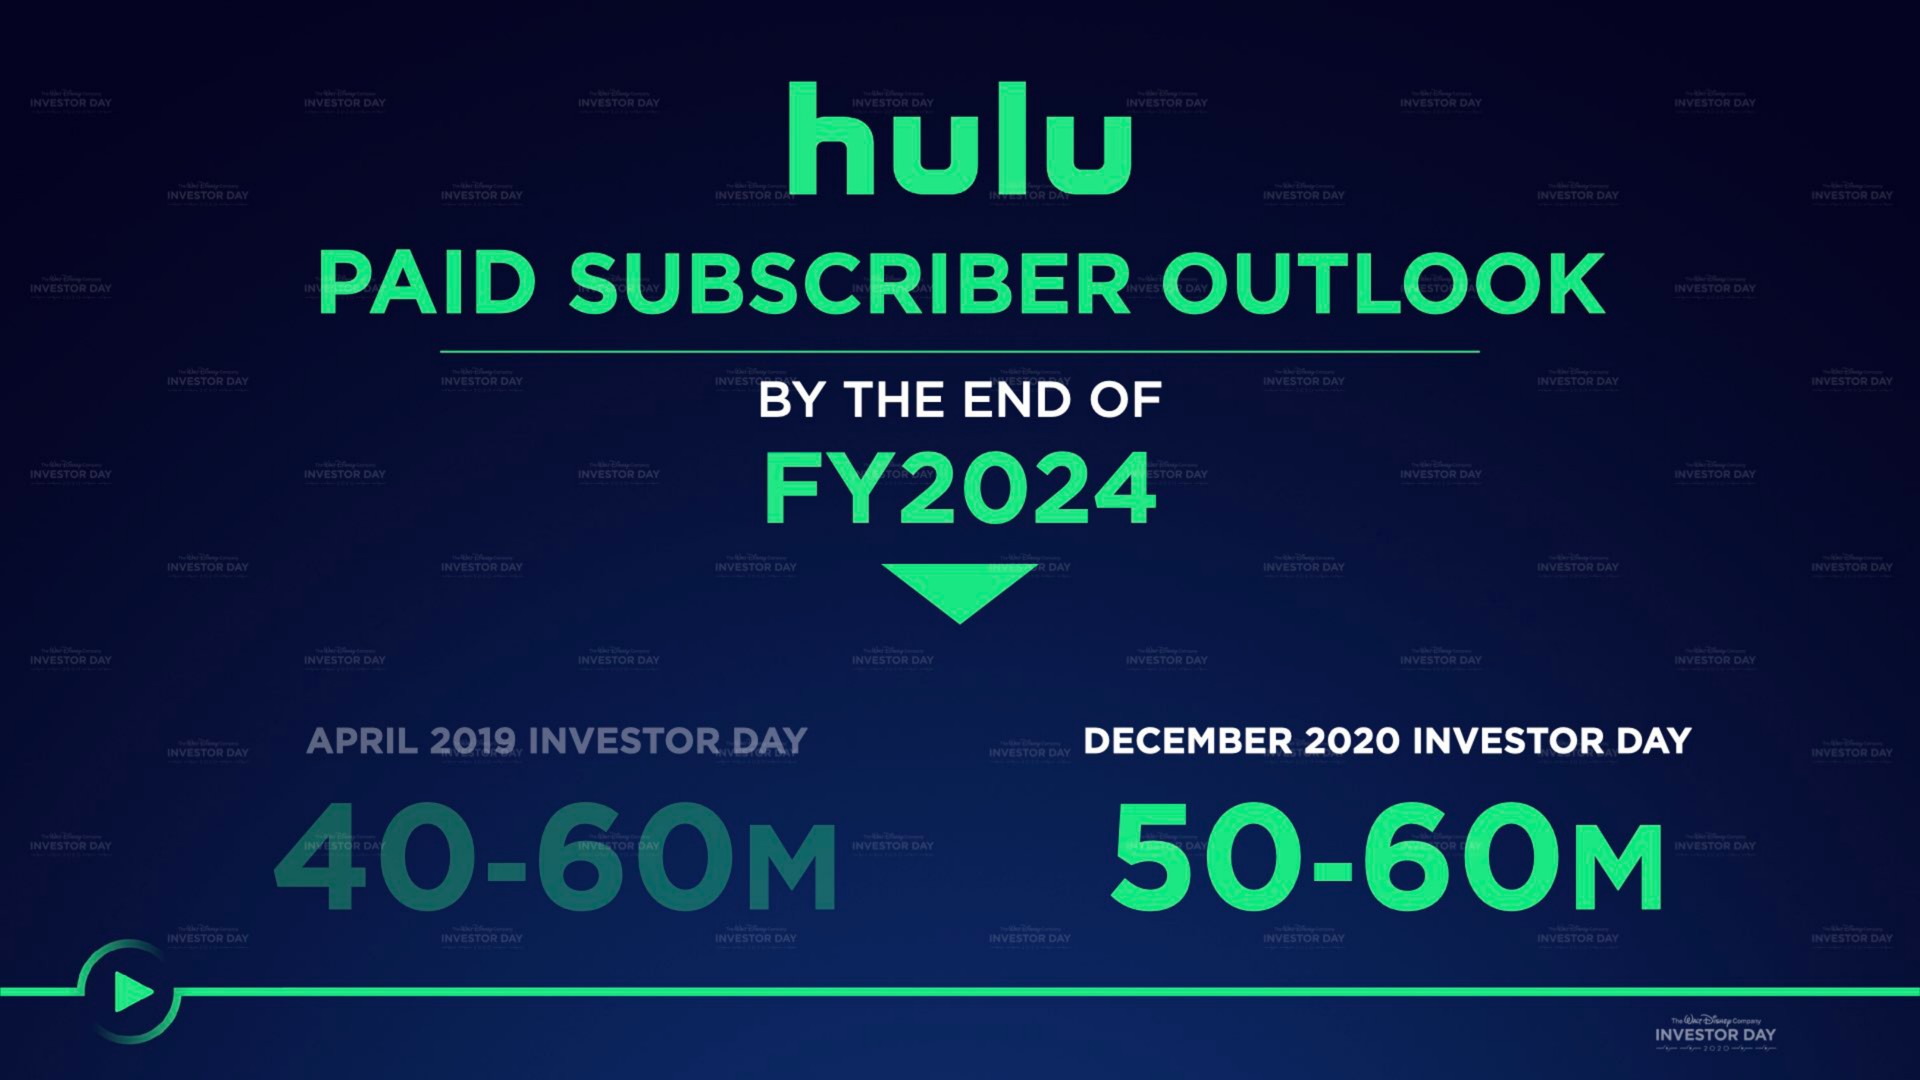 hulu paid subscriber outlook by the end of investor day investor day | Disney